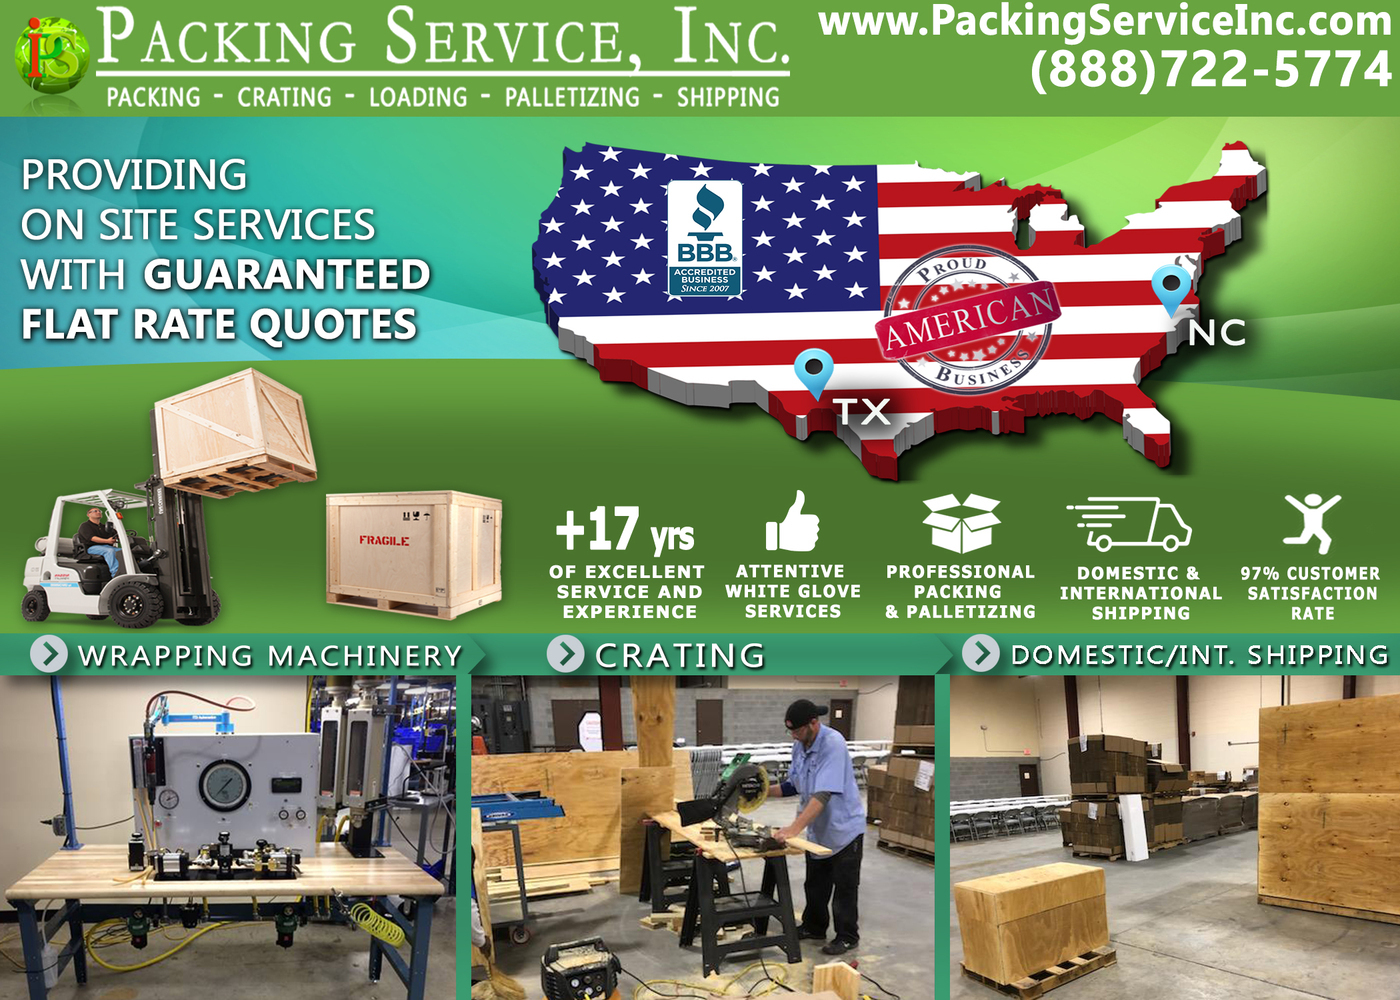 Packing Service Inc. Expands Crating Service Across The Nation